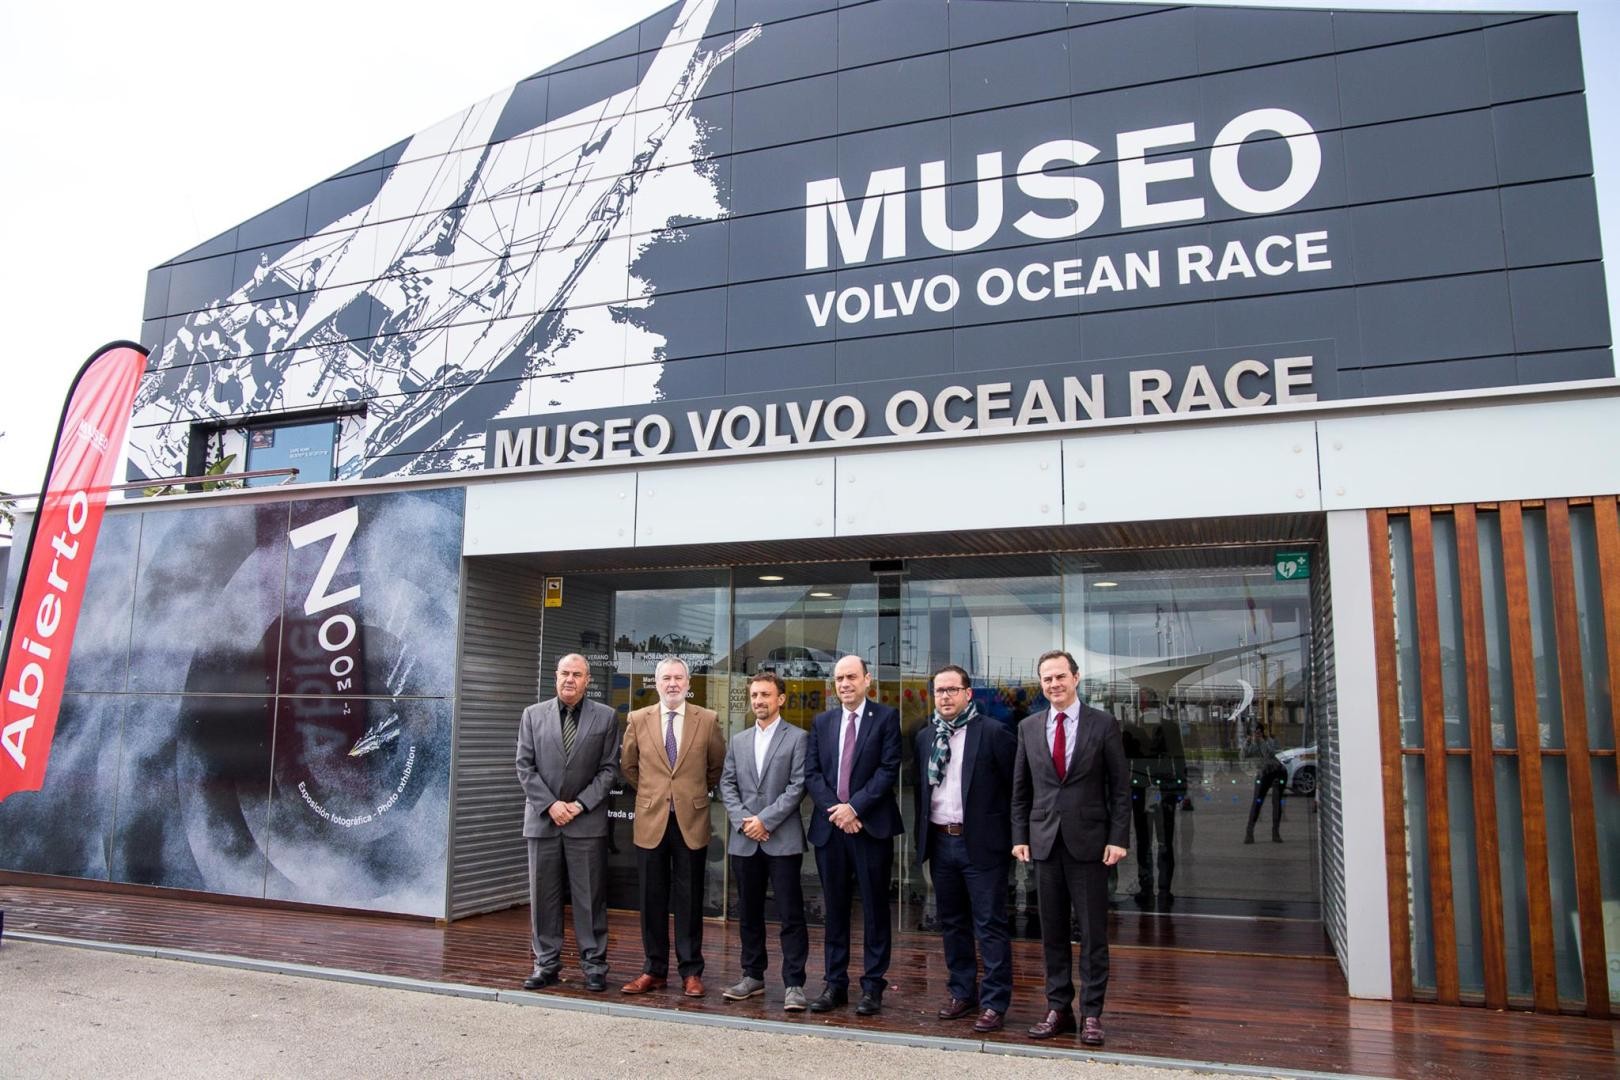 2017-18 Economic Impact press conference at the Volvo Ocean Race Museum. 08 March, 2018.